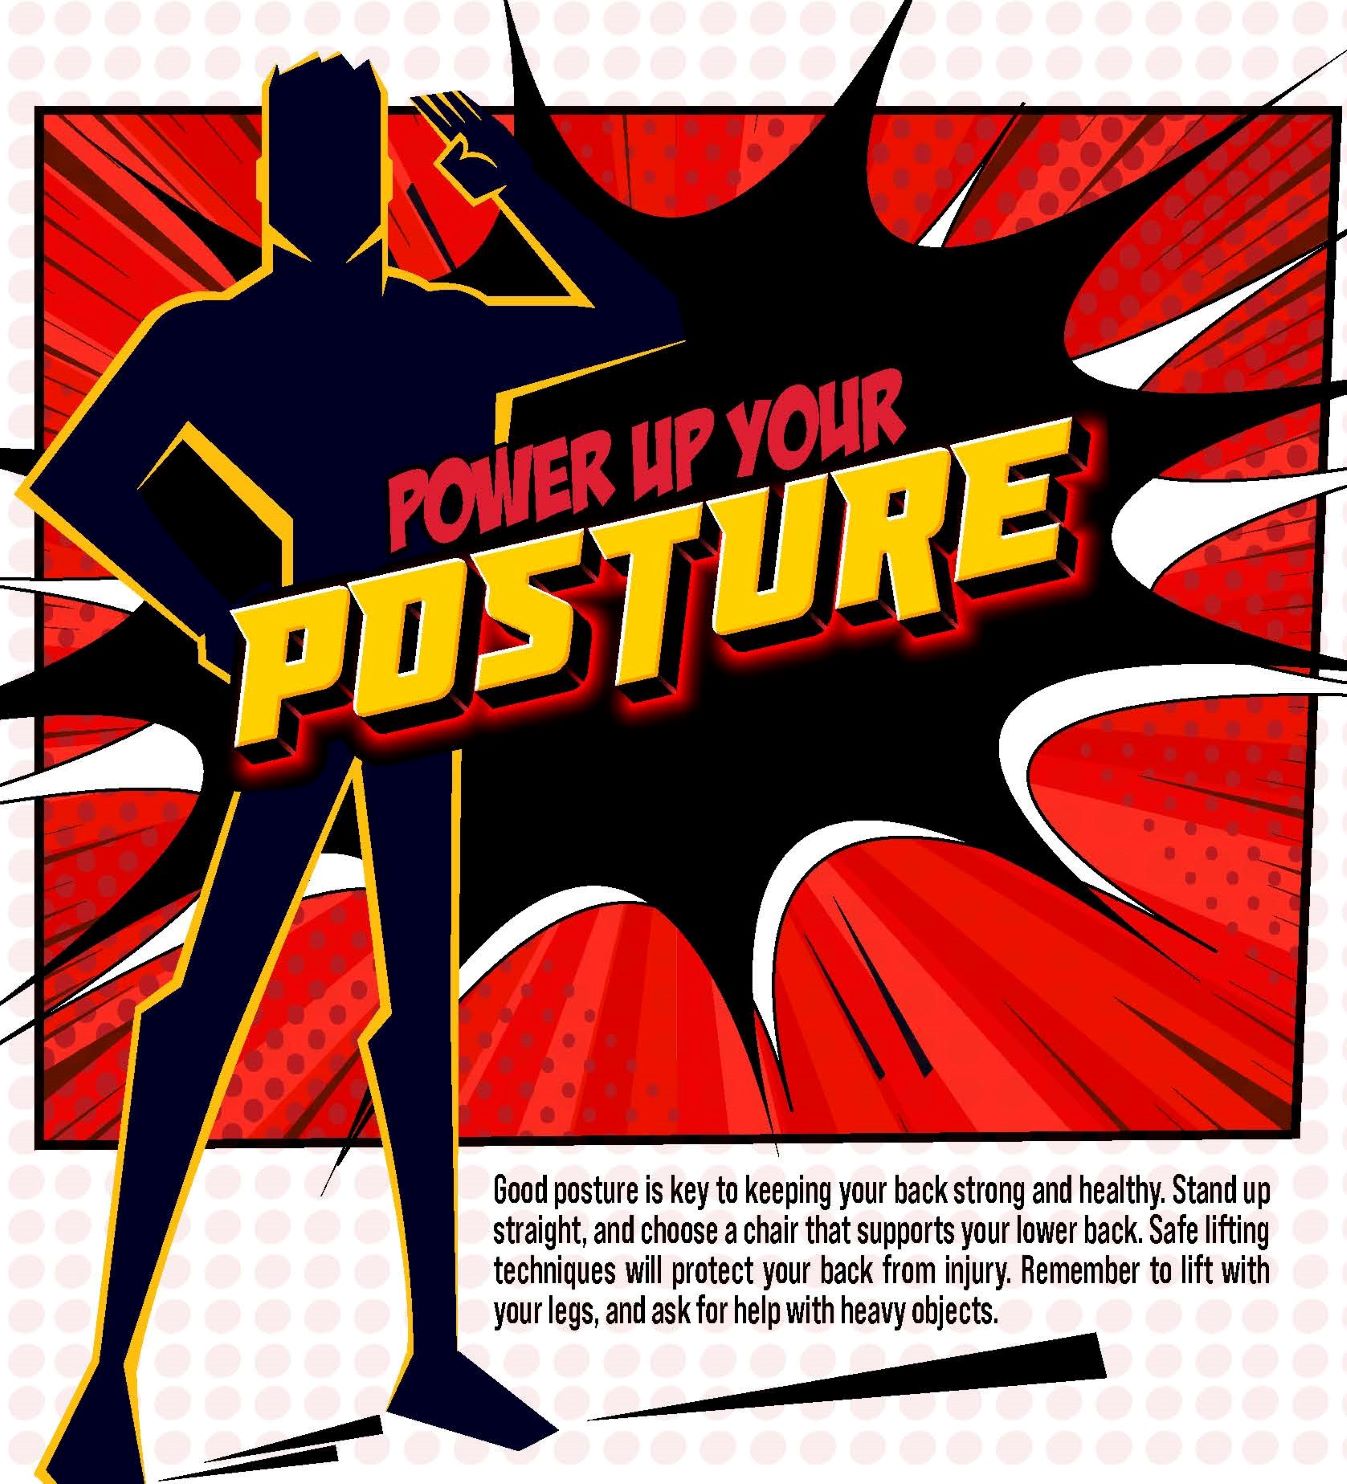 Power Up Your Posture